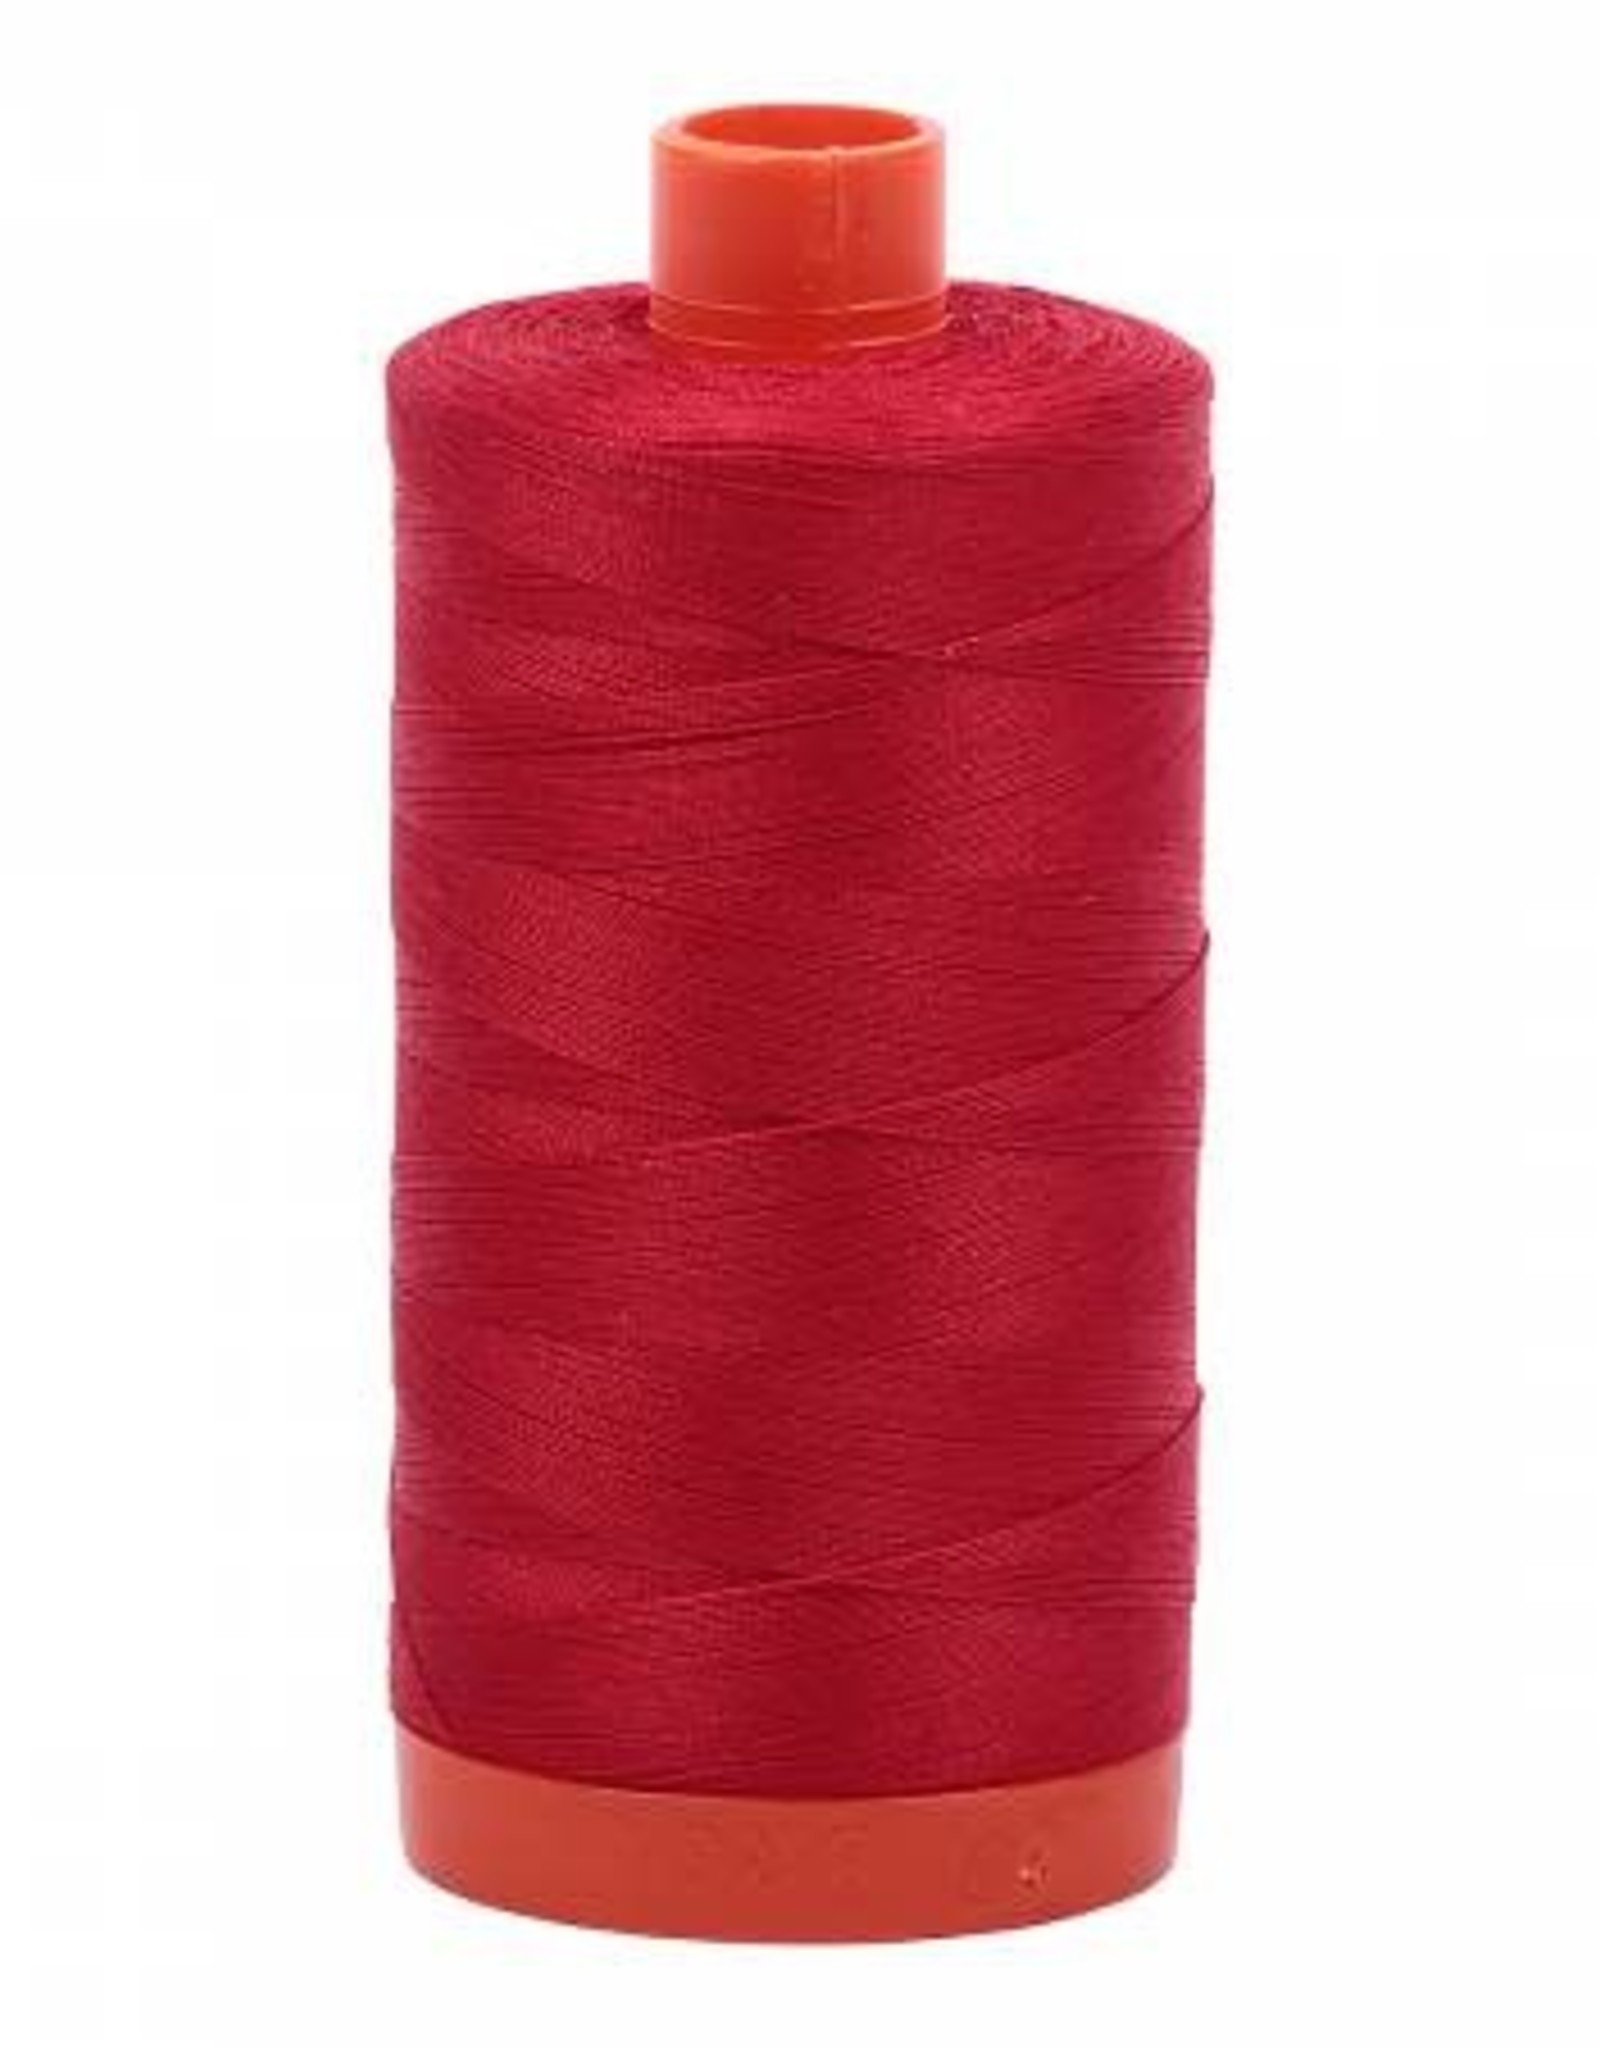 Mako Cotton Thread Solid 50wt -  Red (2250)